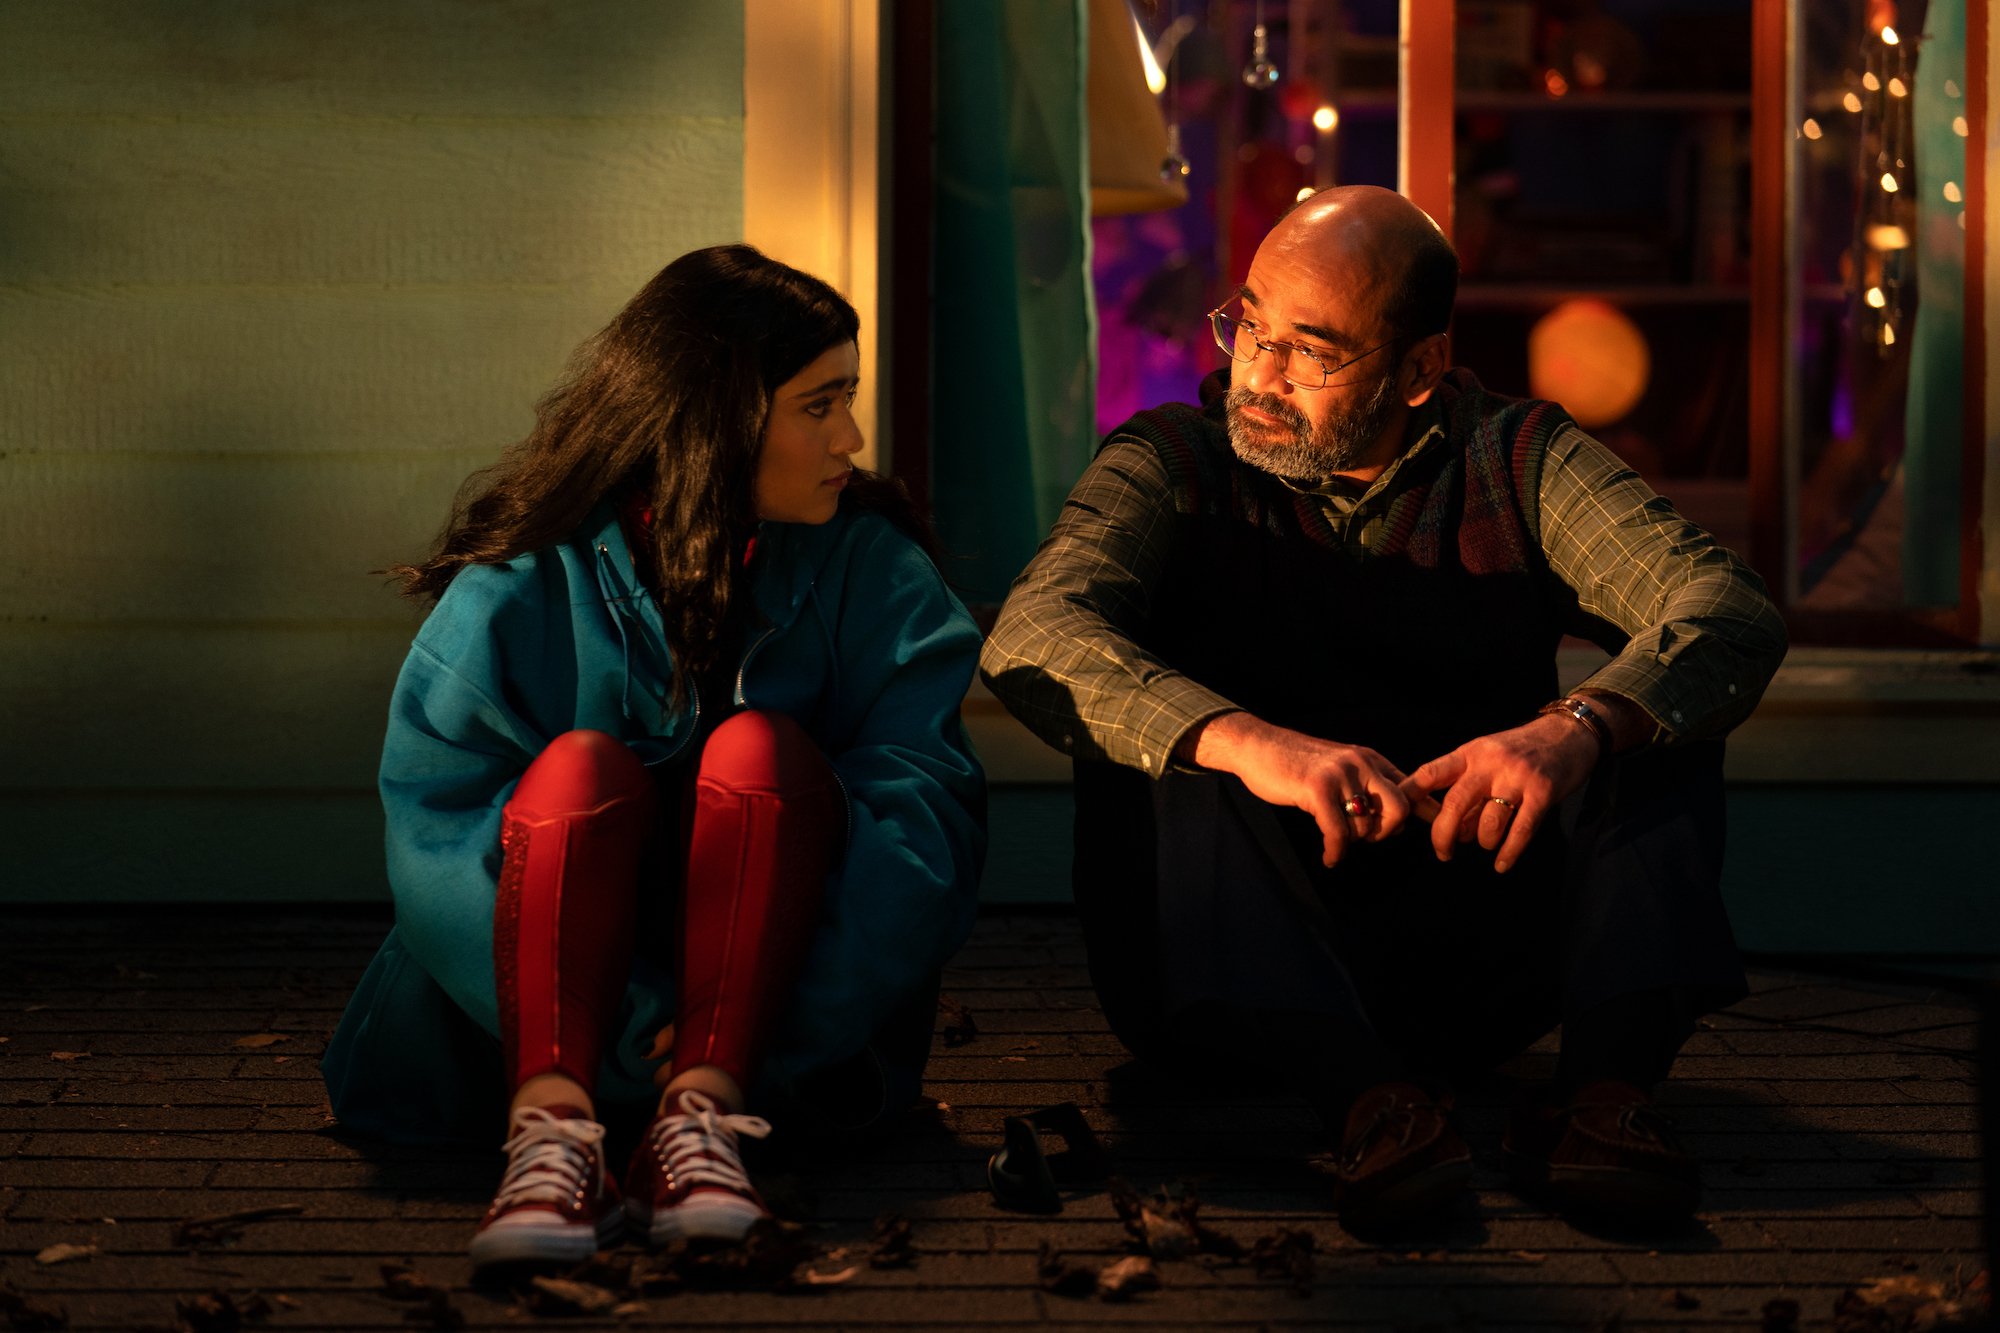 Iman Vellani and Mohan Kapur, in character as Kamala and Yusuf Khan, share a rooftop scene in 'Ms. Marvel' Episode 6 before the post-credits. Kamala wears a light blue jacket over her Ms. Marvel costume. Yusuf wears a red and green plaid sweater vest over a green plaid button-up shirt.